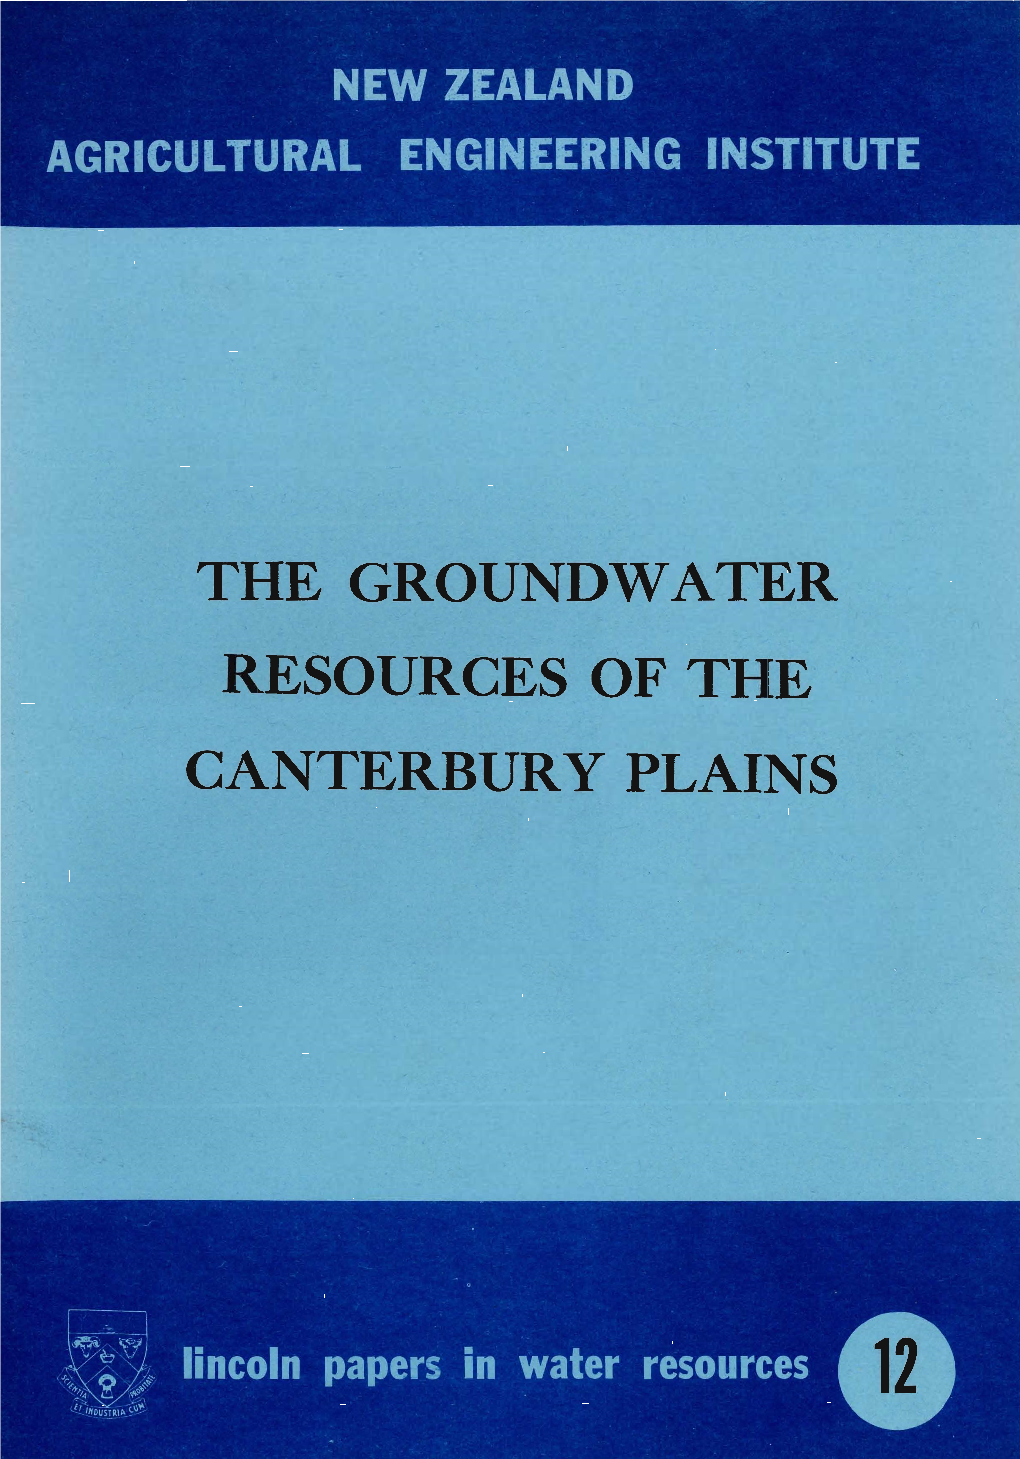 The Groundwater Resources of the Canterbury Plains